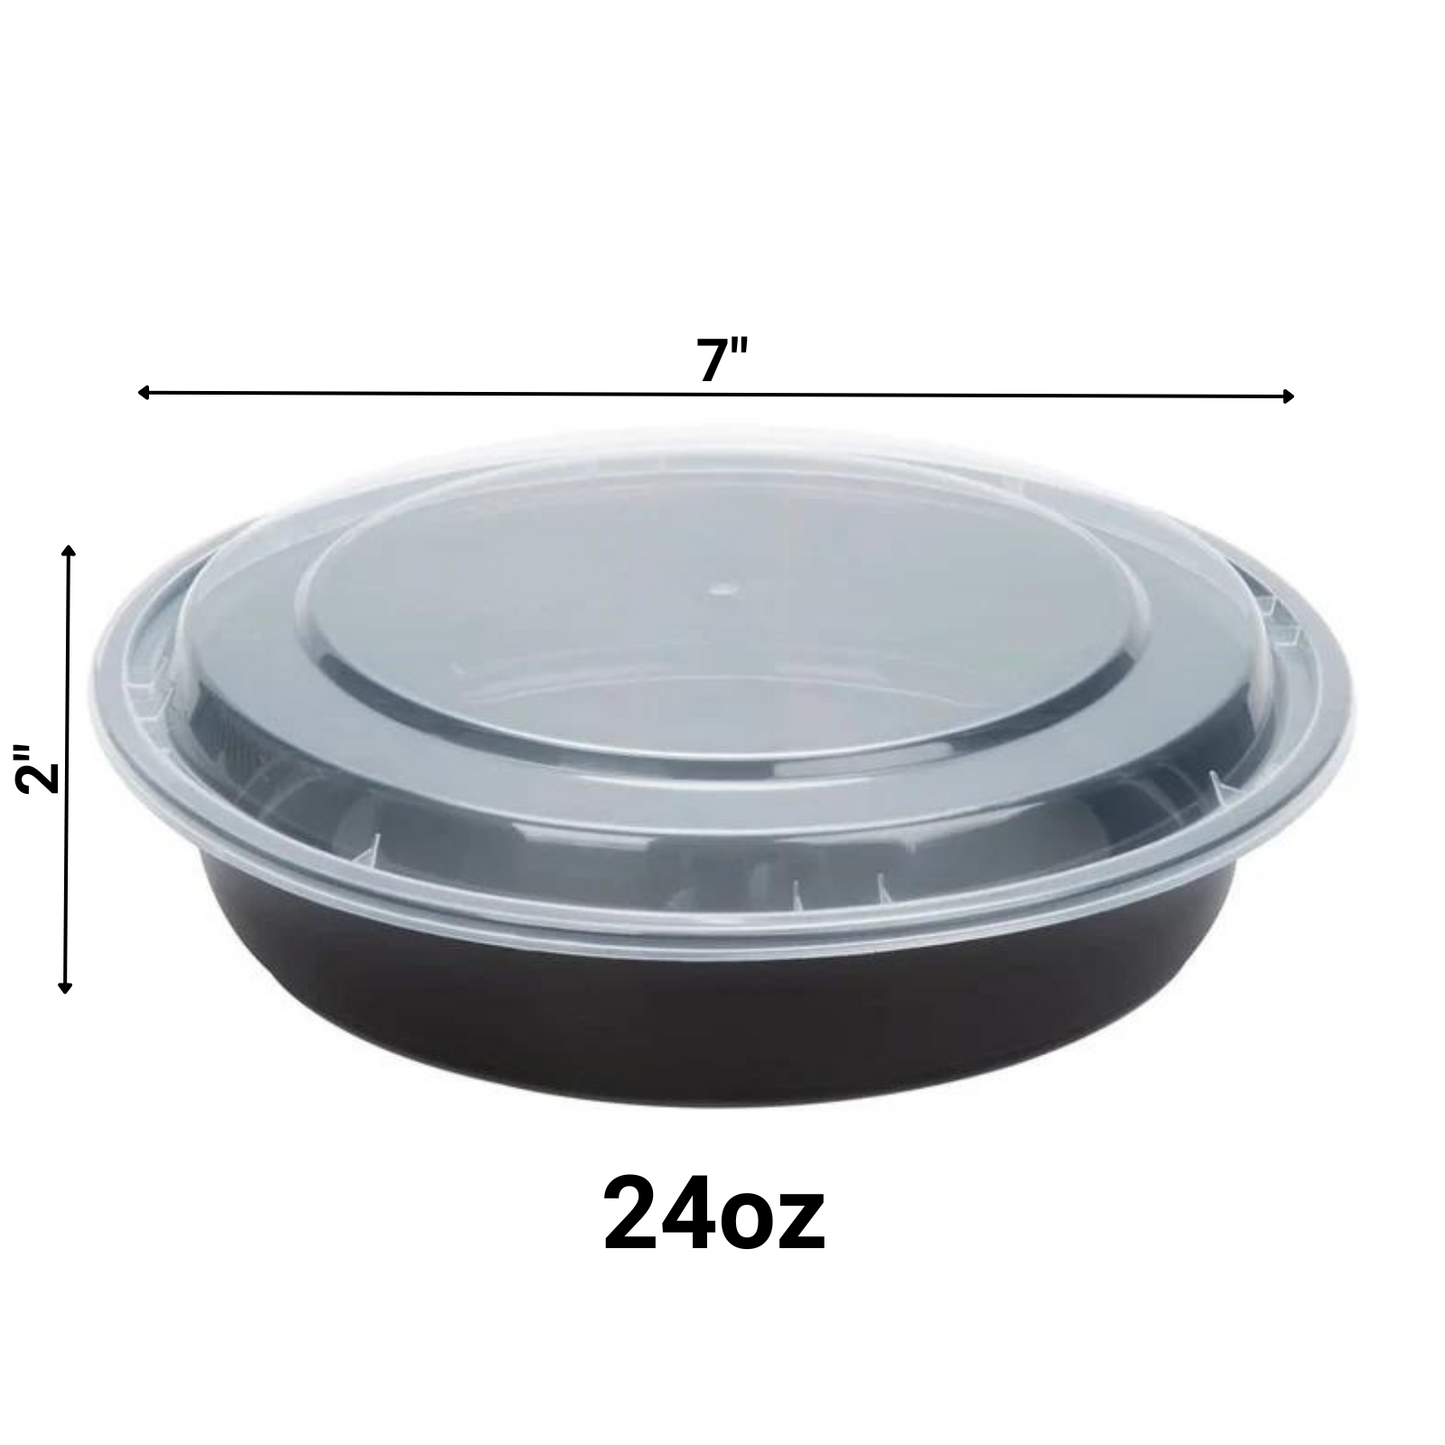 *WHOLESALE*  24oz Black Meal Prep/ Bento Box Container with Clear Lid | 150ct/Case Food Storage & Serving VeZee   